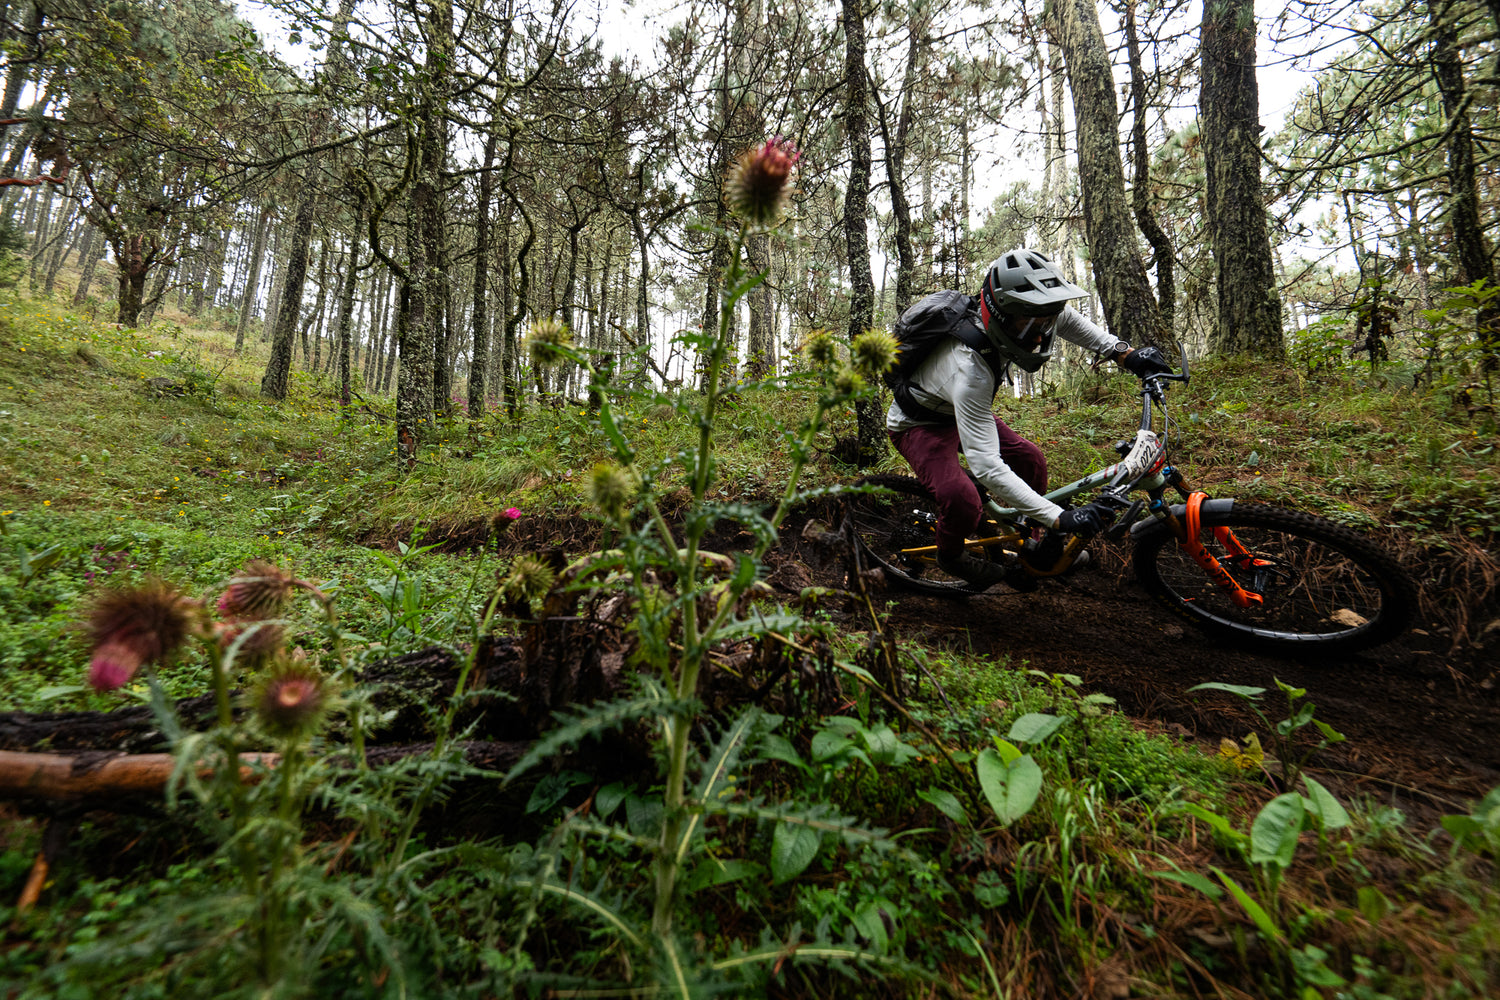 Trans-Sierra Norte: A unique blend of blind enduro racing and culture